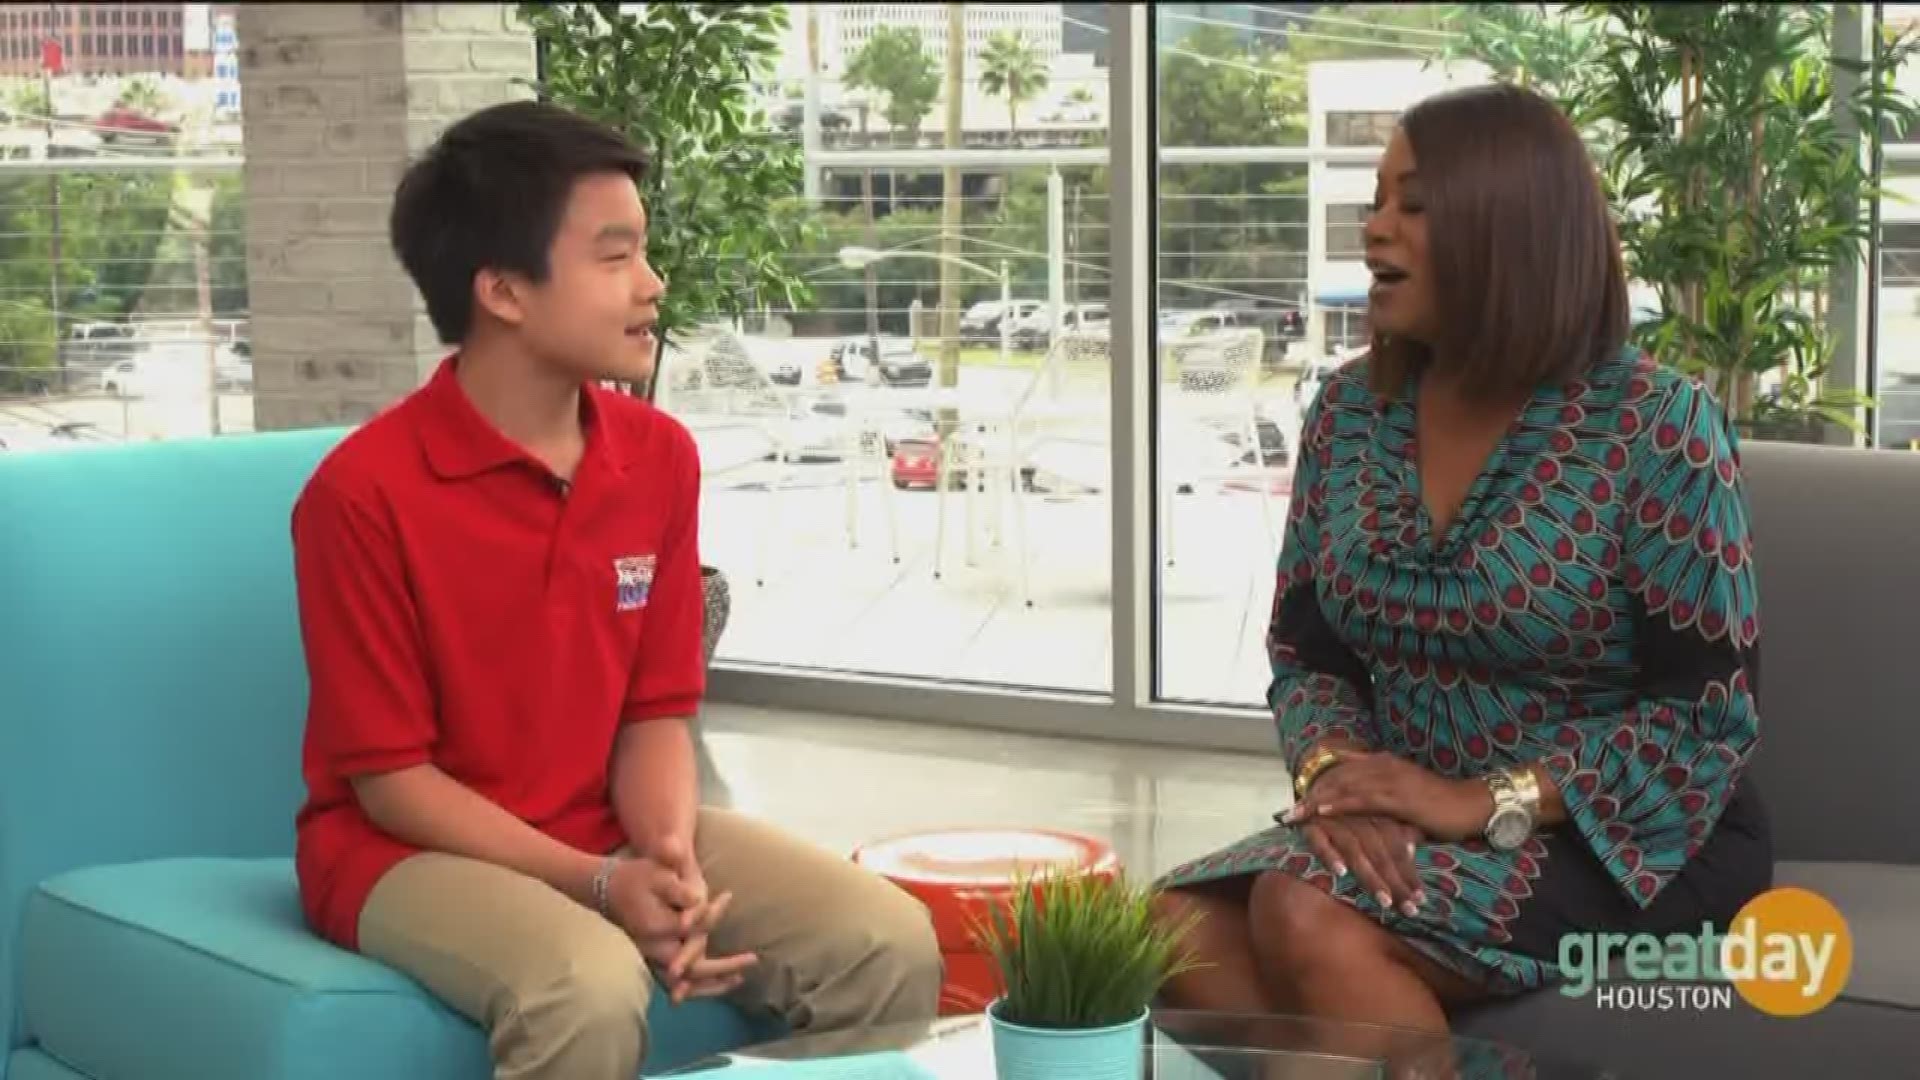 Benjamin Who, speaks about how his interest in journalism began, and how he became a Kid Reporter with Scholastic News. He also turns the tables and interviews Great Day Houston host Deborah Duncan.
